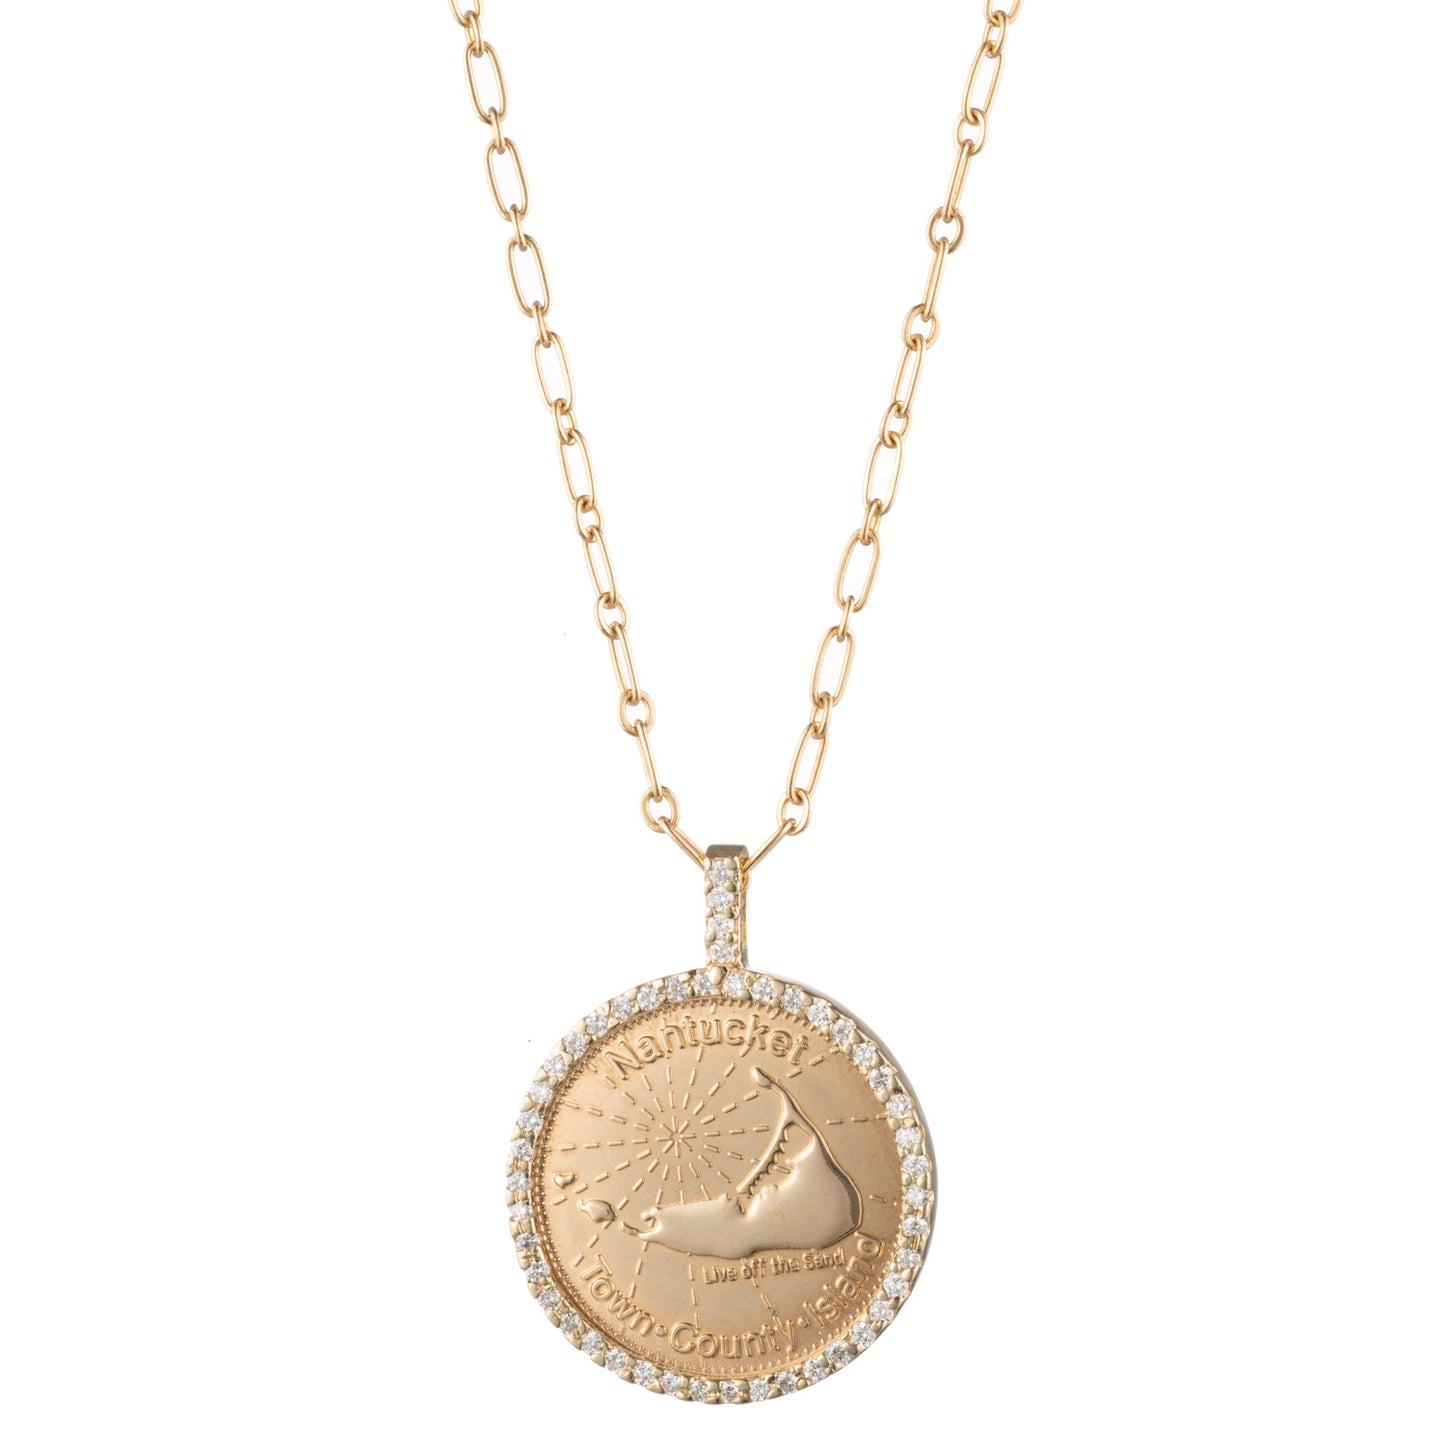 Commemorative Coin Pendant with Diamond Framed in Gold